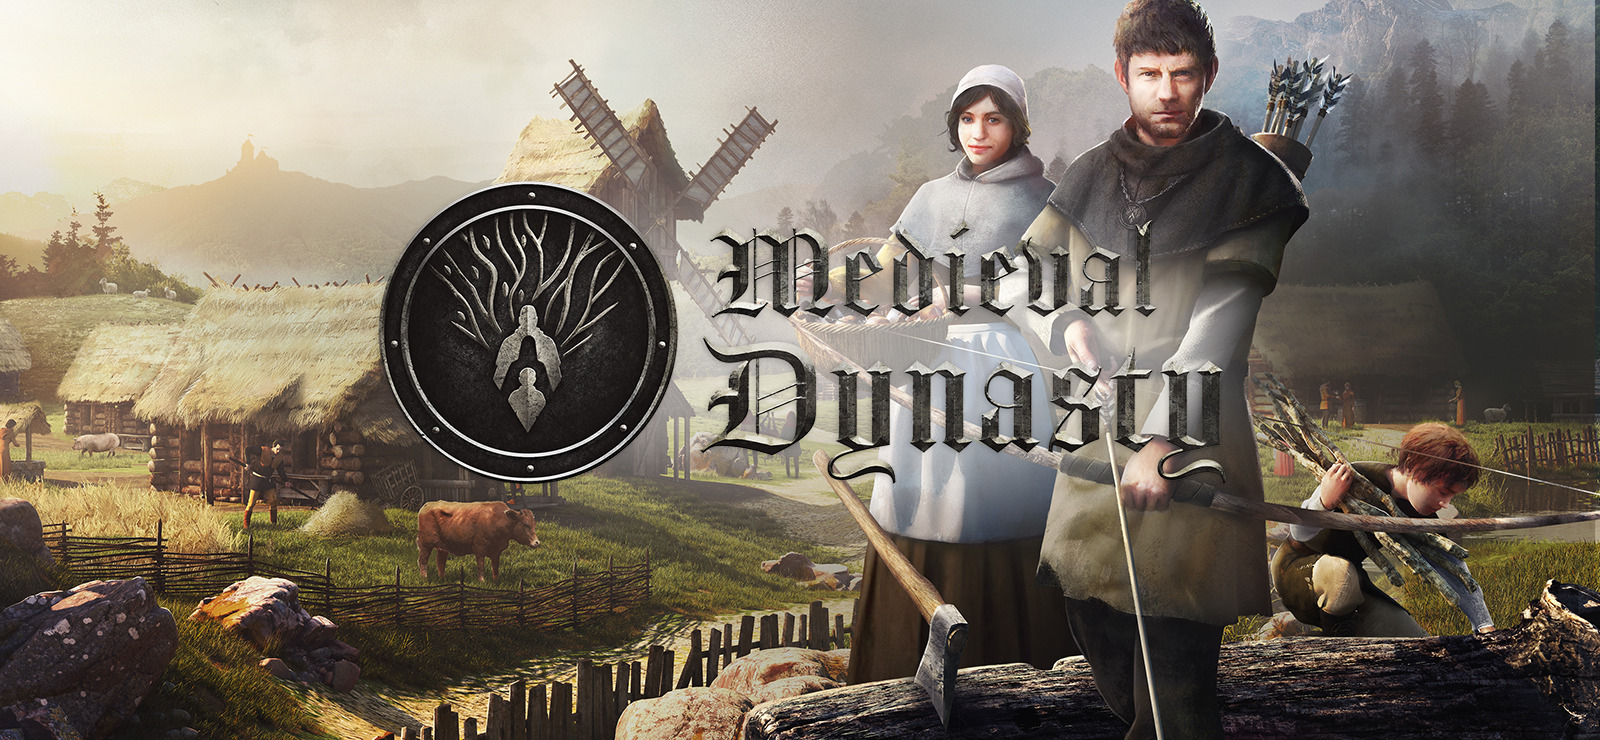 Medieval Dynasty New Settlement Game Review - Completing quests to earn rewards and enhance your settlement